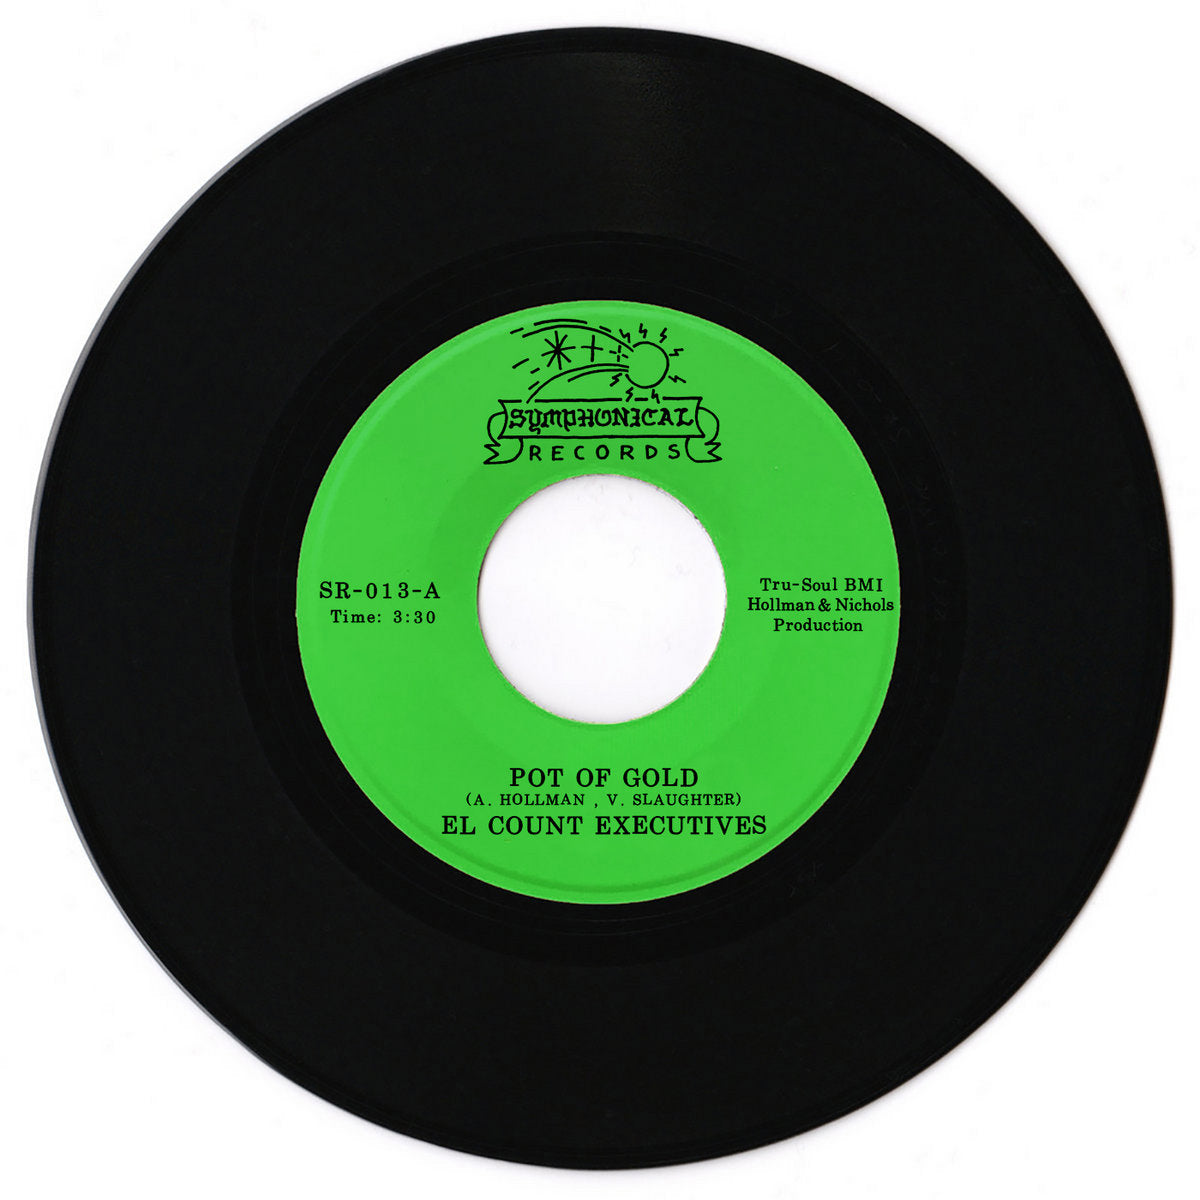 EL COUNT EXECUTIVES - POT OF GOLD b/w NOTHING COMES TO A SLEEPER (BUT A DREAM) Vinyl 7" EP